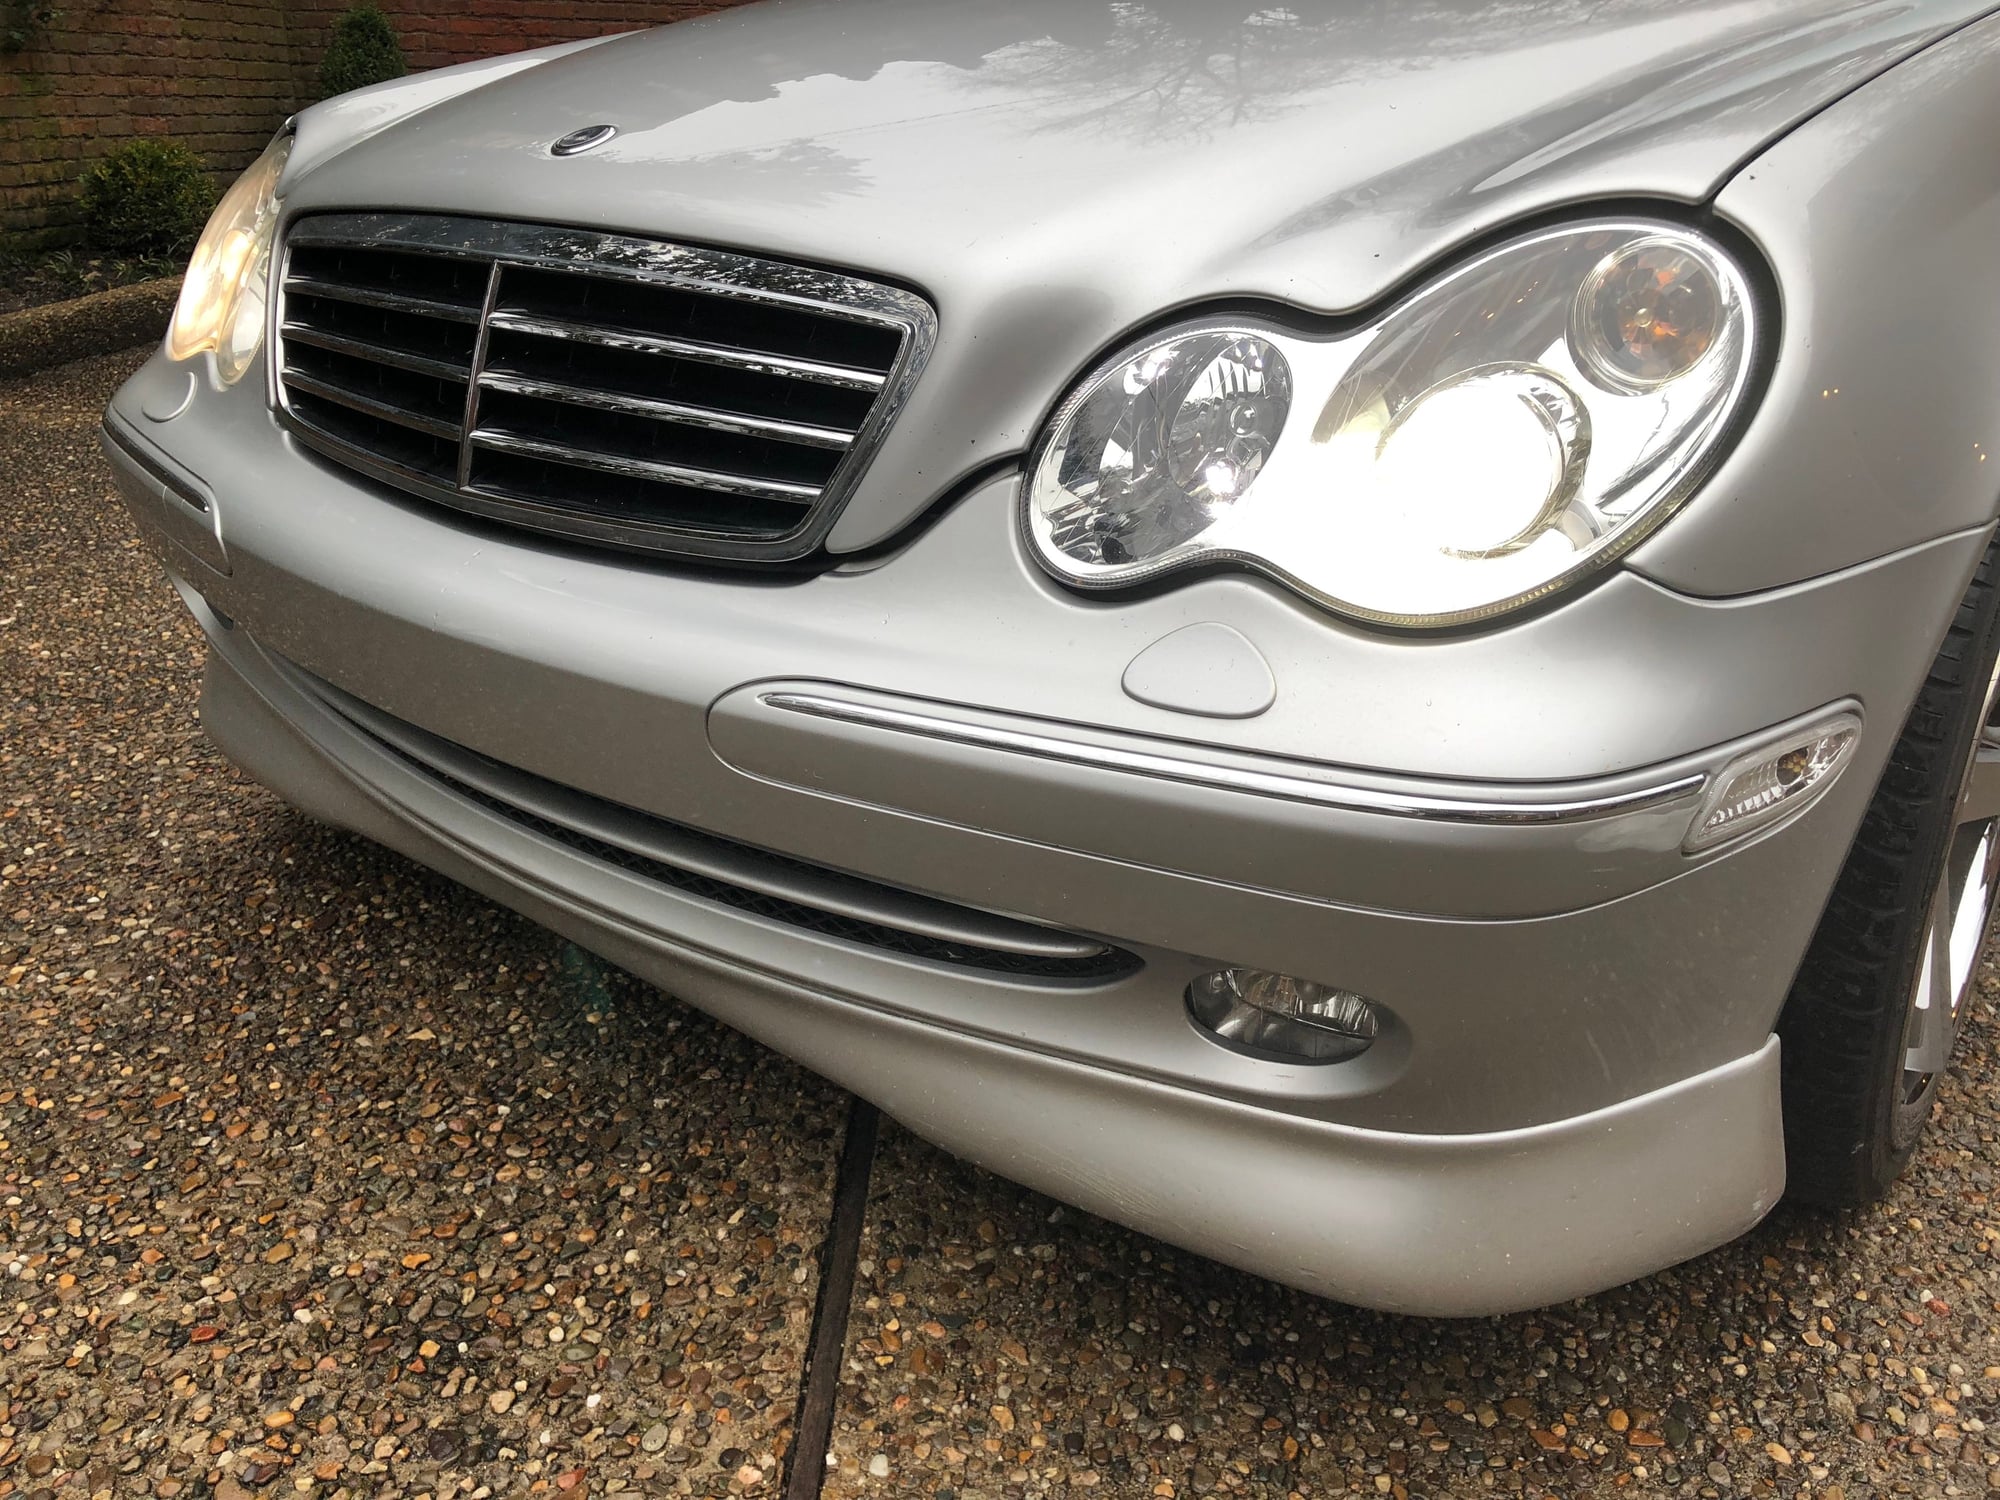 2003 Mercedes-Benz C230 - 2003 Mercedes Benz C230k with Carlsson Modifications - Used - VIN WDBRF40J93F439185 - 114,100 Miles - 4 cyl - 2WD - Manual - Sedan - Silver - Louisville, KY 40206, United States